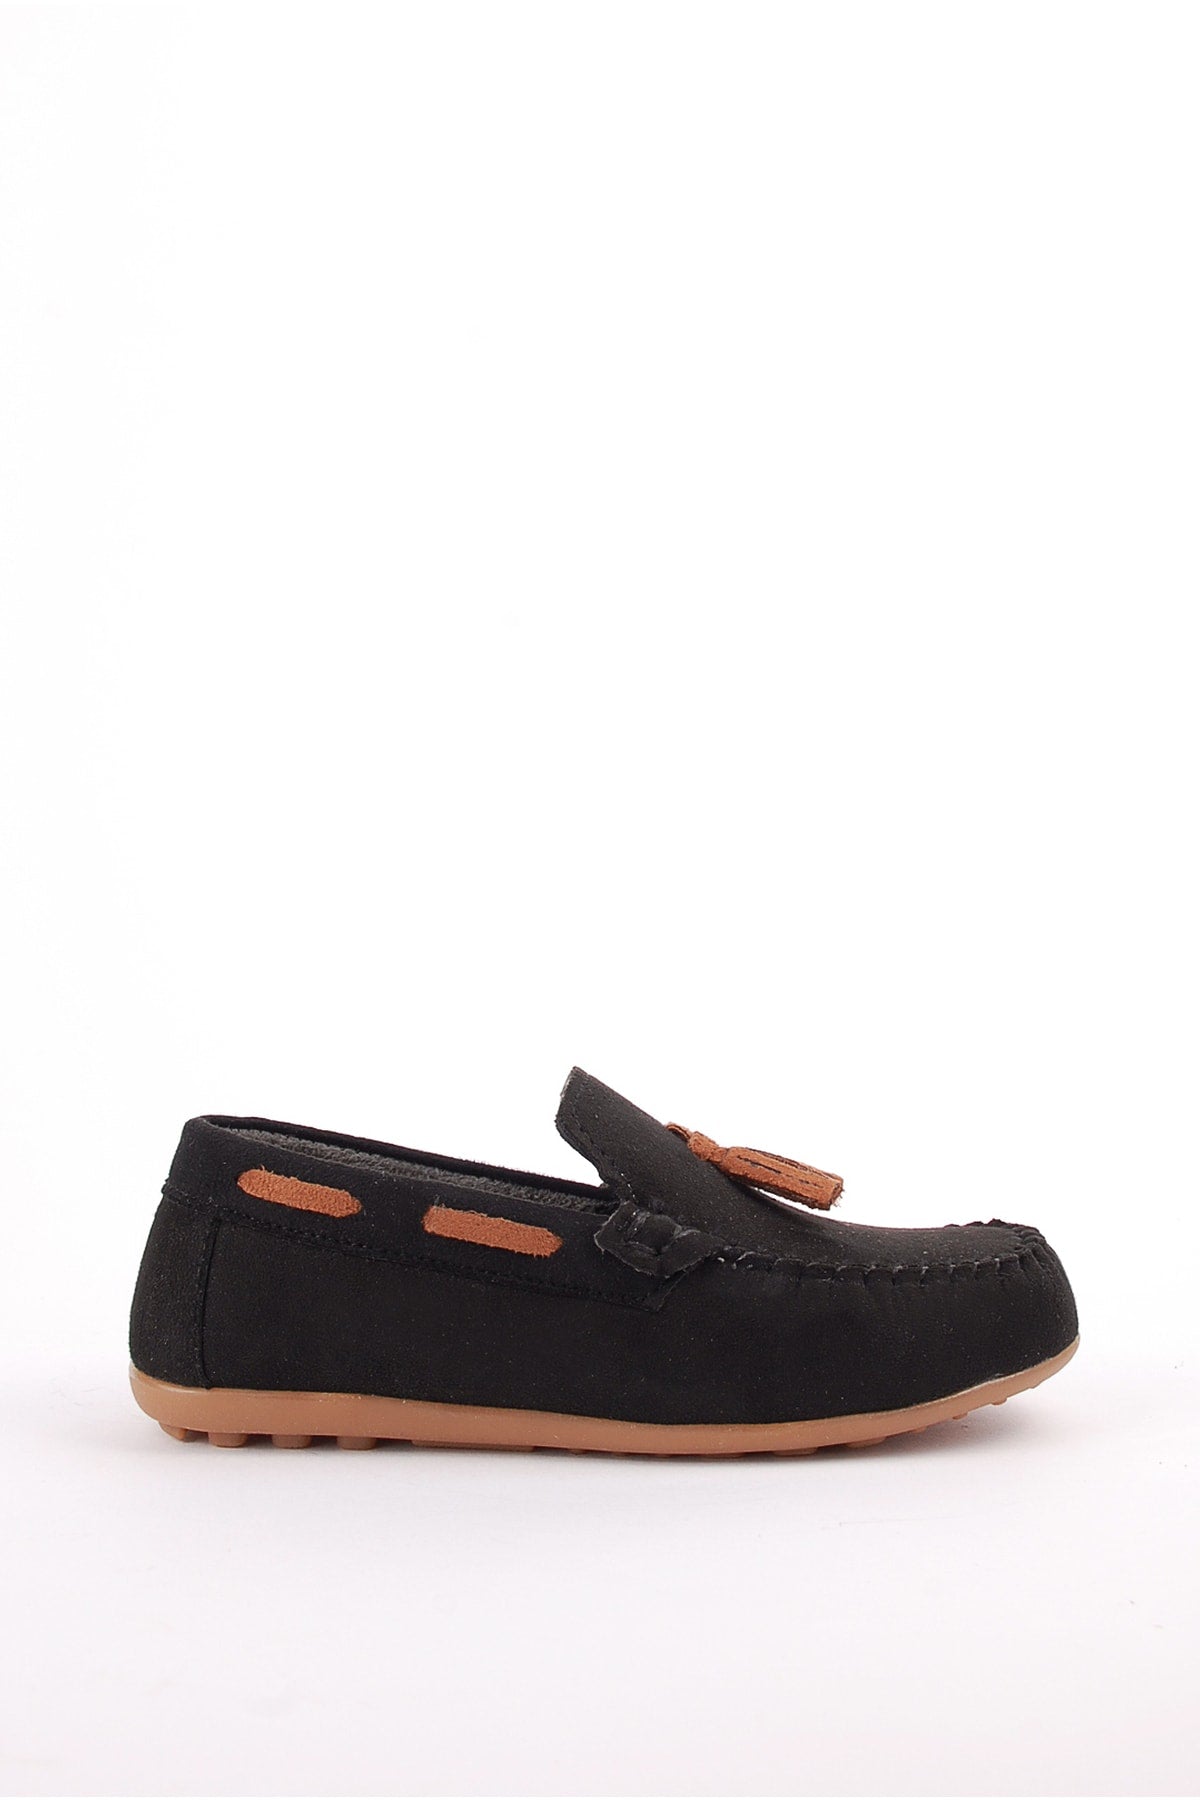 Boys Suede Loafers Loafers Black